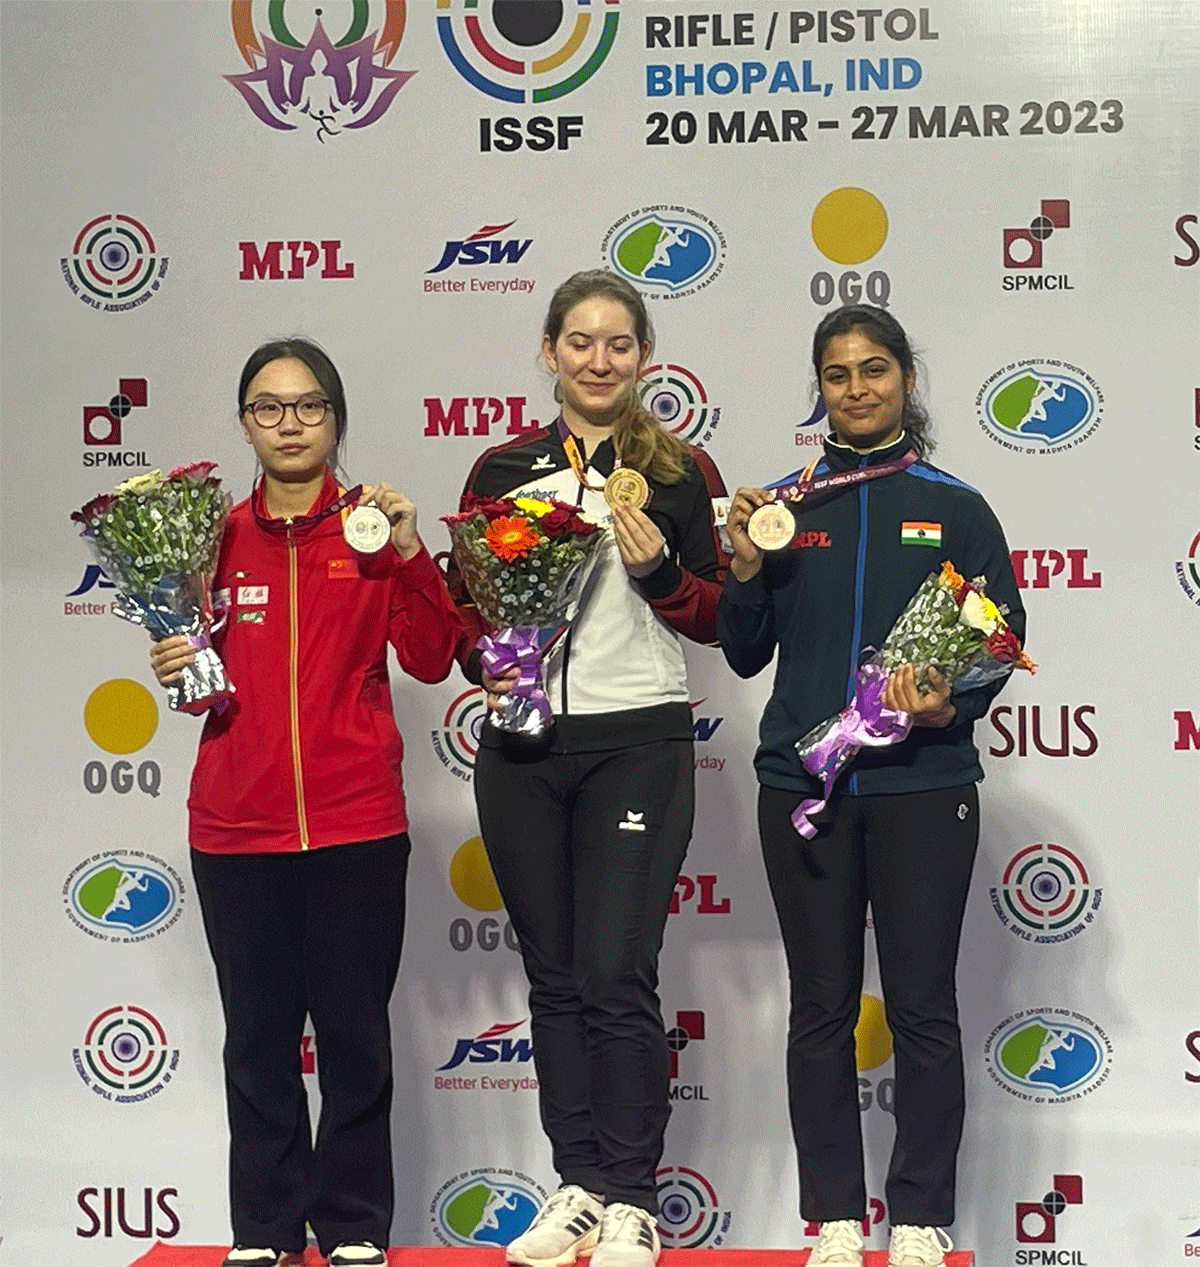 Germany's Doreen Veenekamp claimed gold, China's Du Ziyue won silver and India's Manu Bhaker bagged bronze in the women’s 25m Pistol event at the ISSF World Cup in Bhopal on Saturday